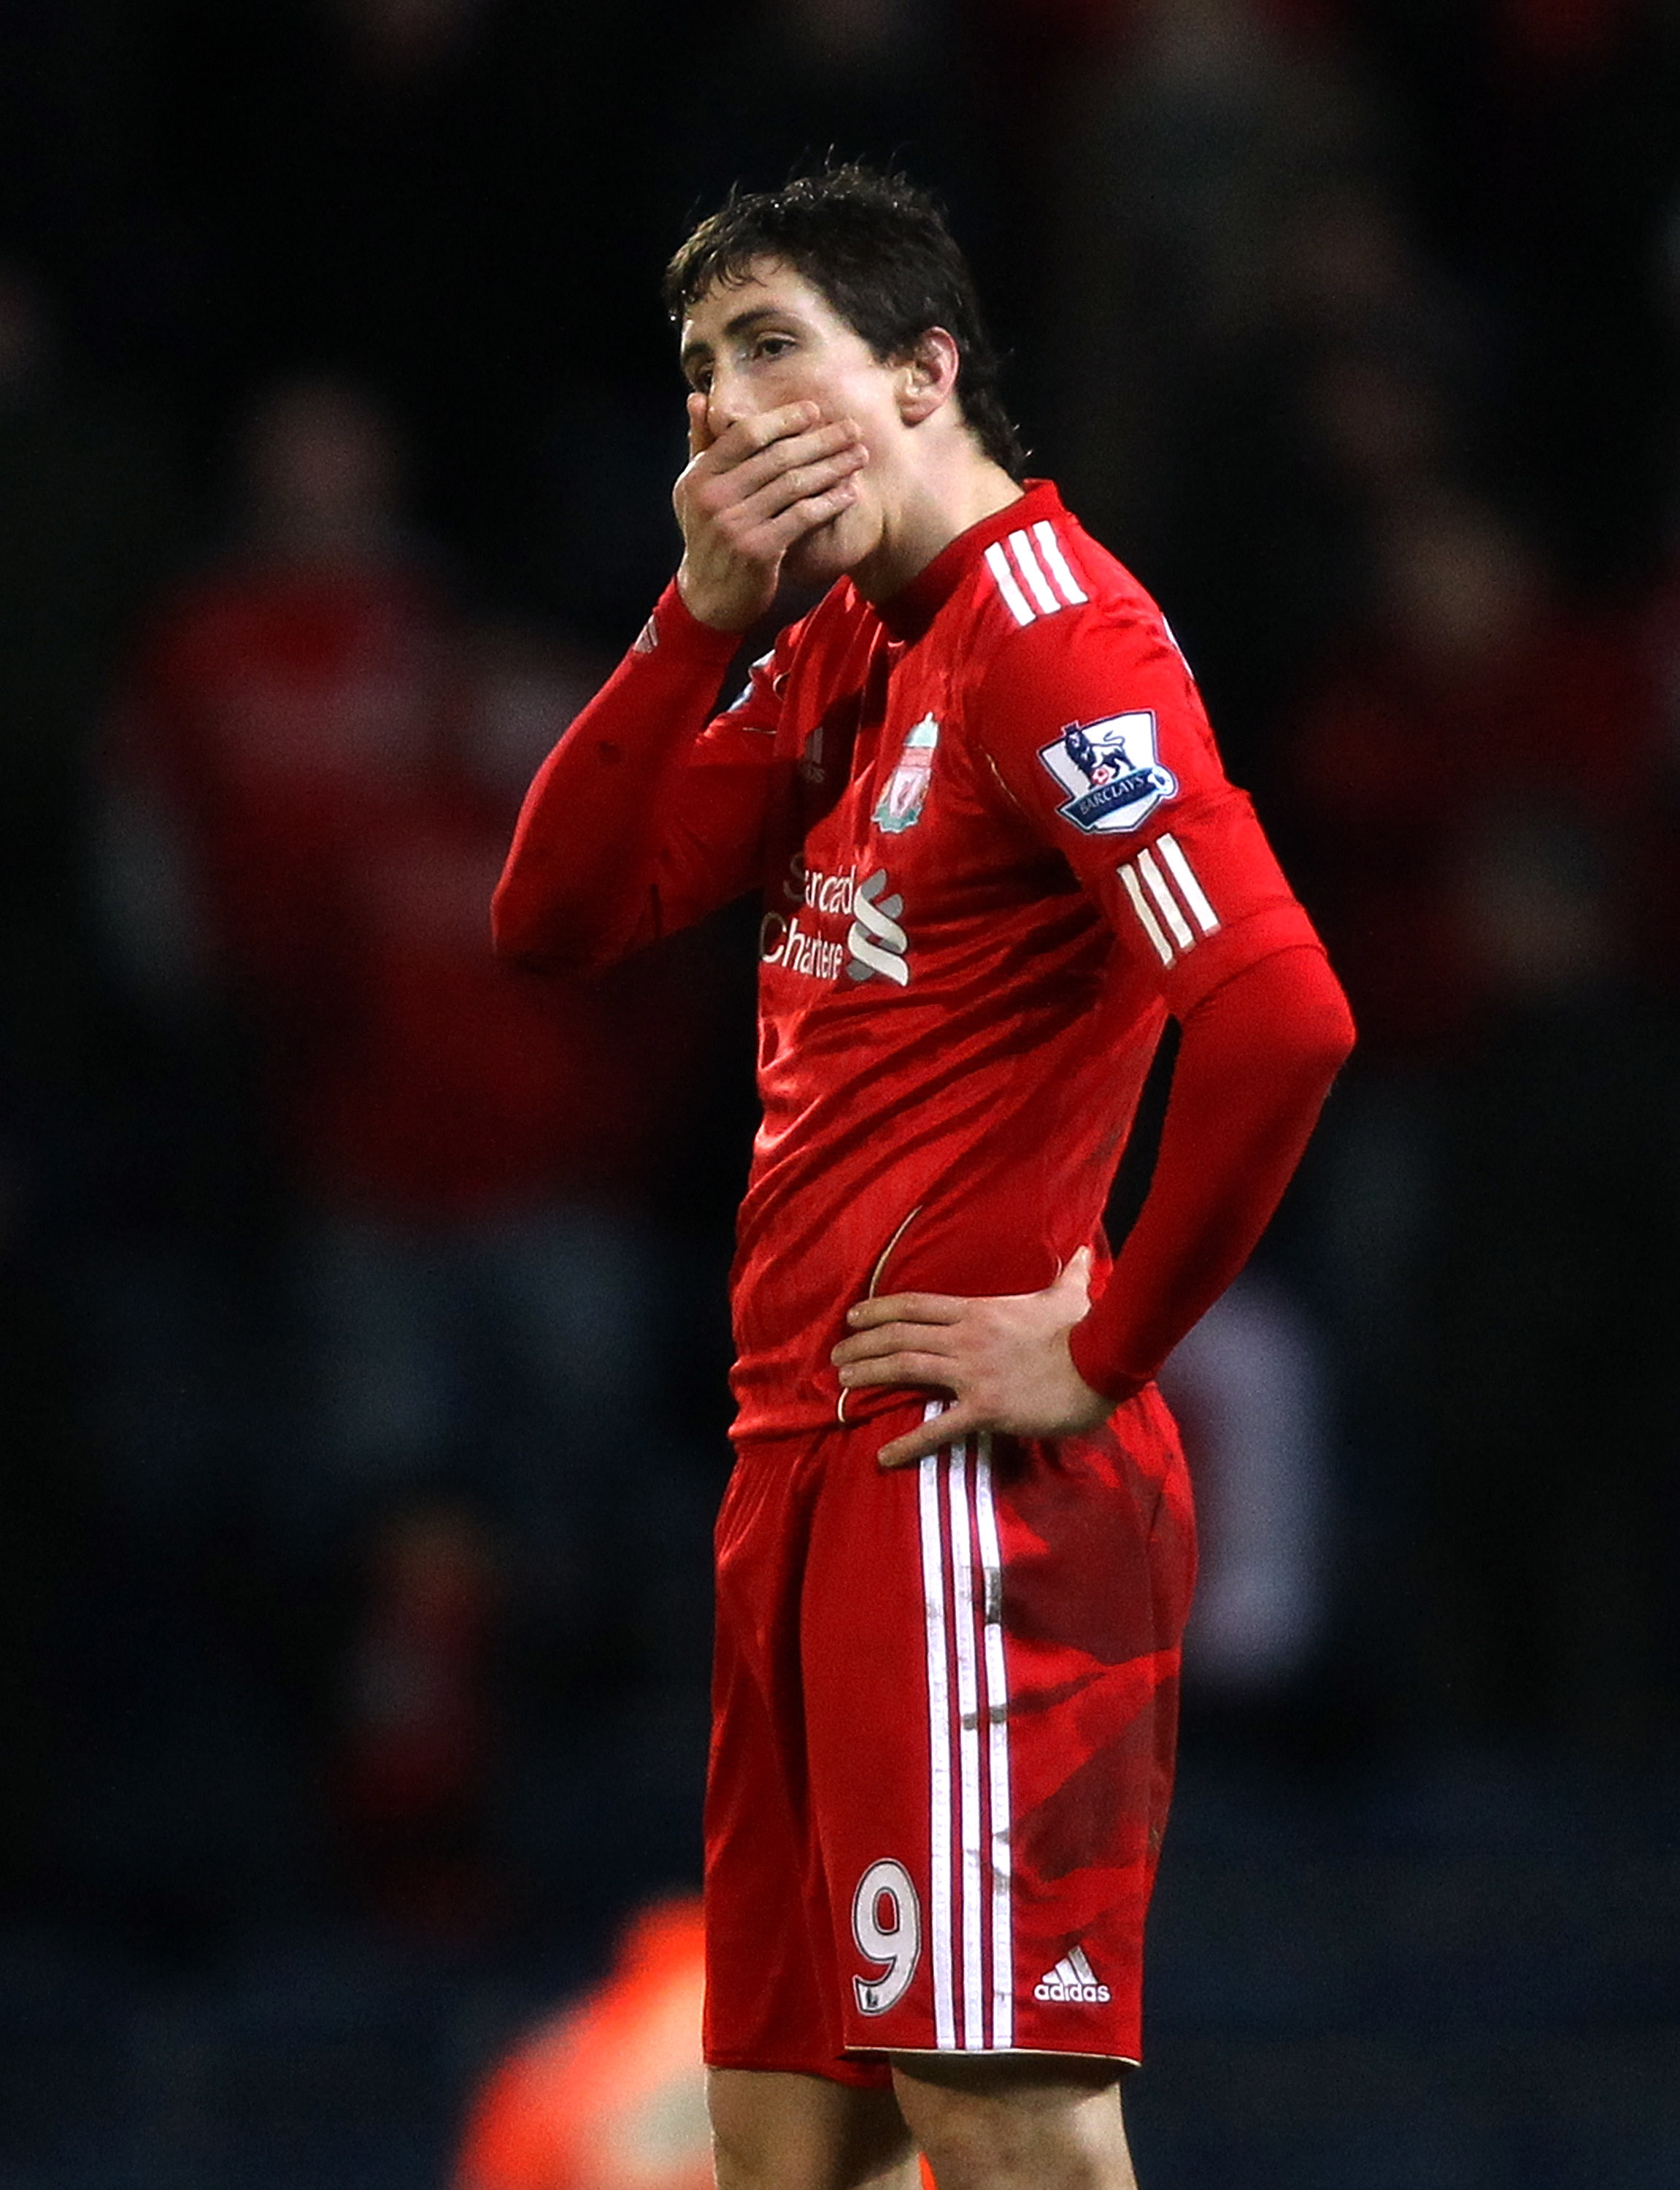 BLACKBURN, ENGLAND - JANUARY 05:  Fernando Torres of Liverpool dejected during a Barclays Premier league match betweem Blackburn Rovers and Liverpool at Ewood park on January 5, 2011 in Blackburn, England.  (Photo by Clive Brunskill/Getty Images)